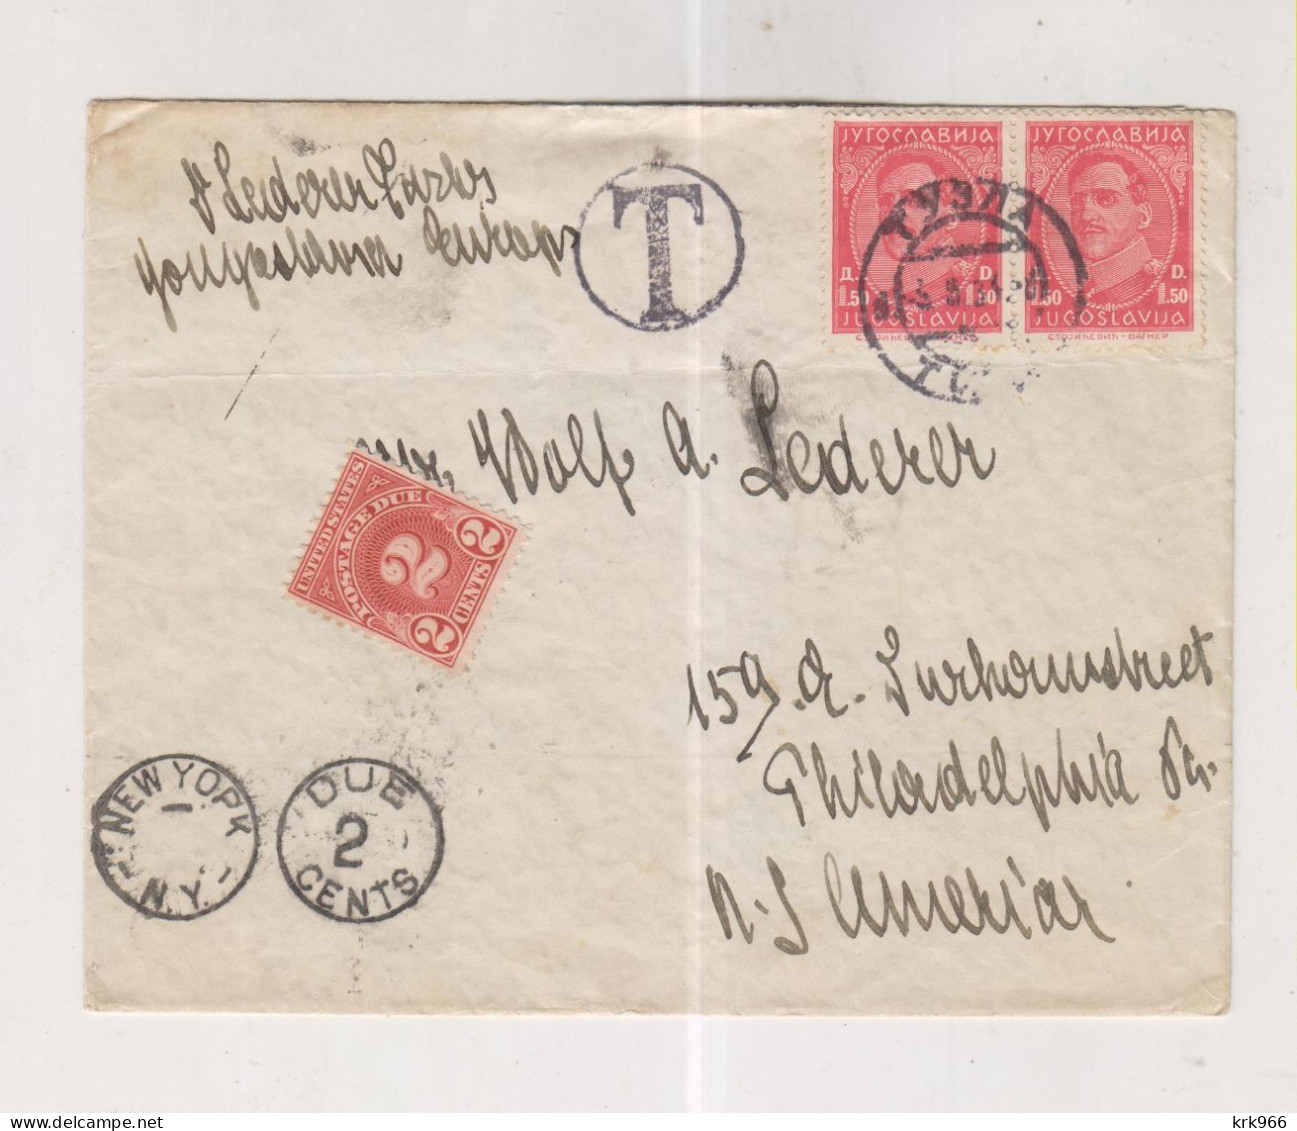 YUGOSLAVIA TUZLA 1934 Nice Cover To United States Postage Due - Lettres & Documents